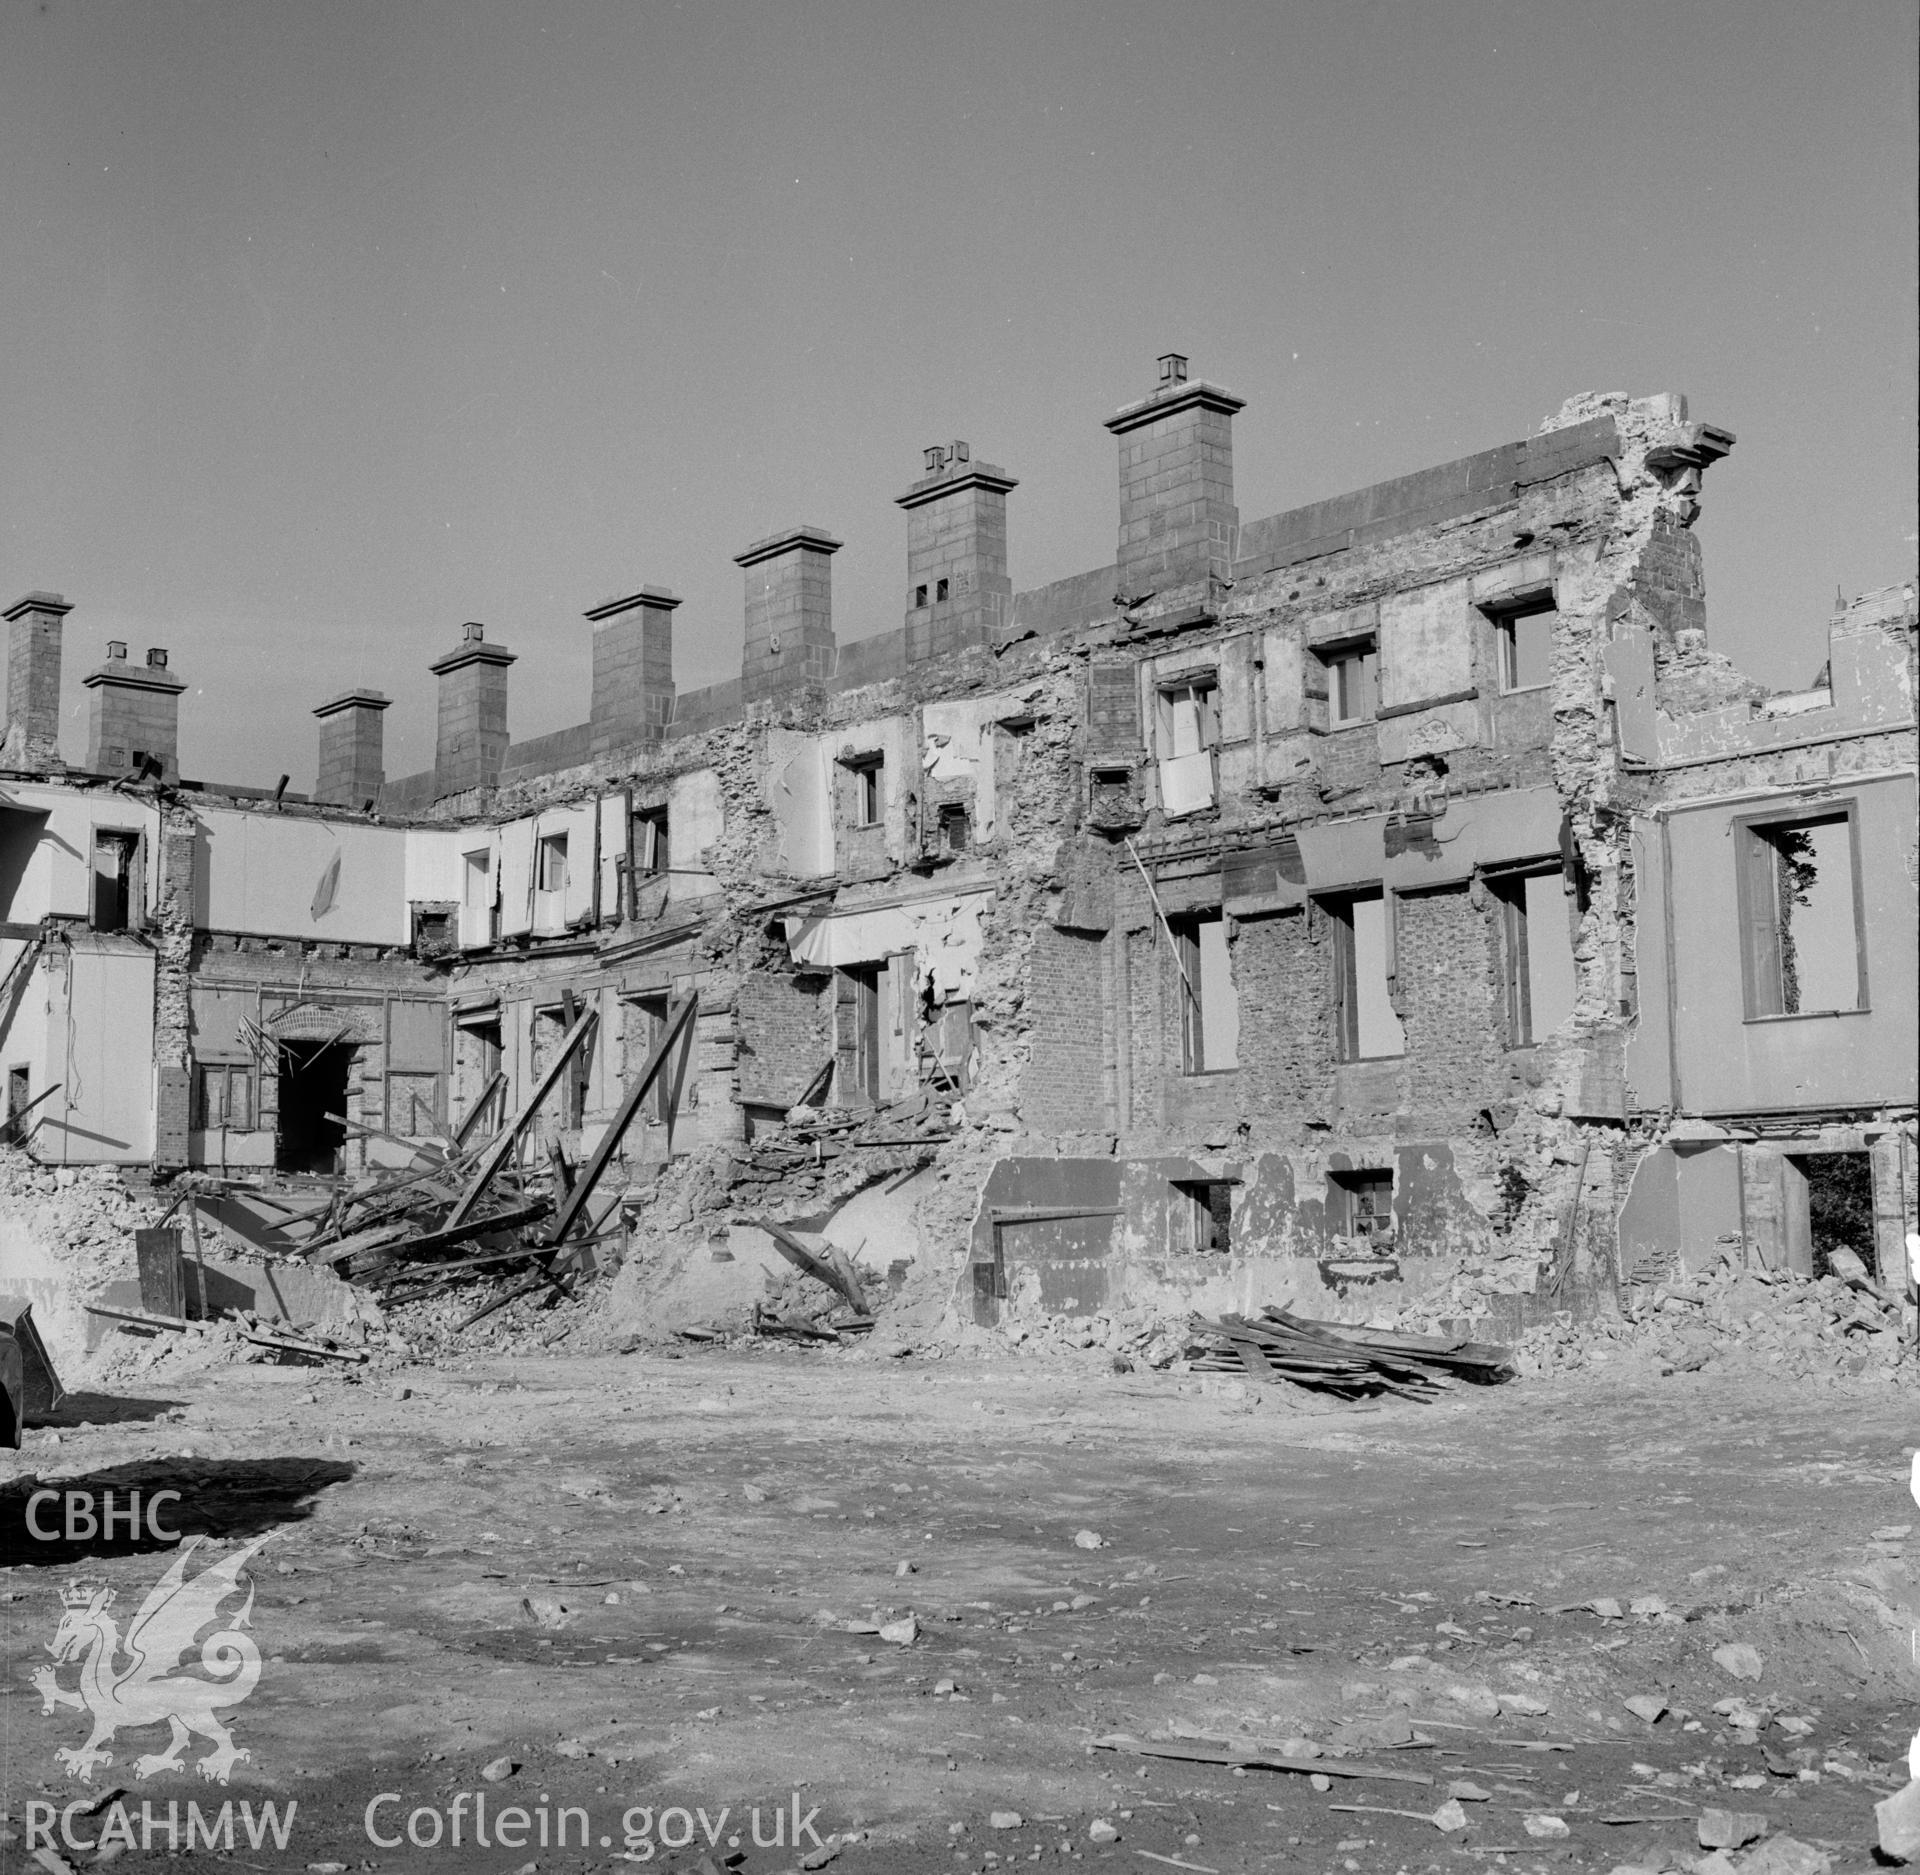 Digital copy of a nitrate negative showing Stackpole Court during demolition, 1963.